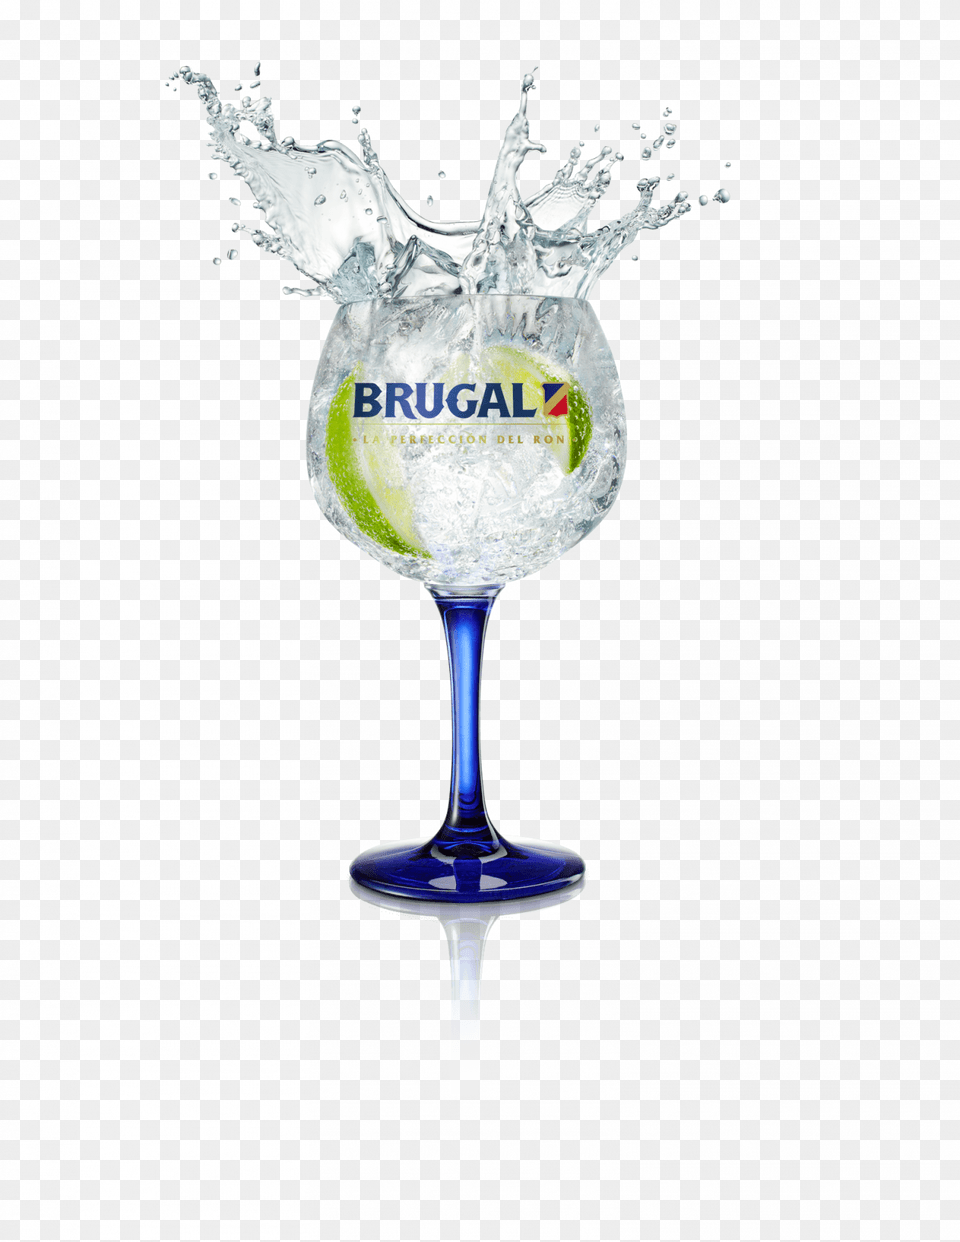 Tonic And Lime Snifter, Alcohol, Wine, Liquor, Wine Glass Png